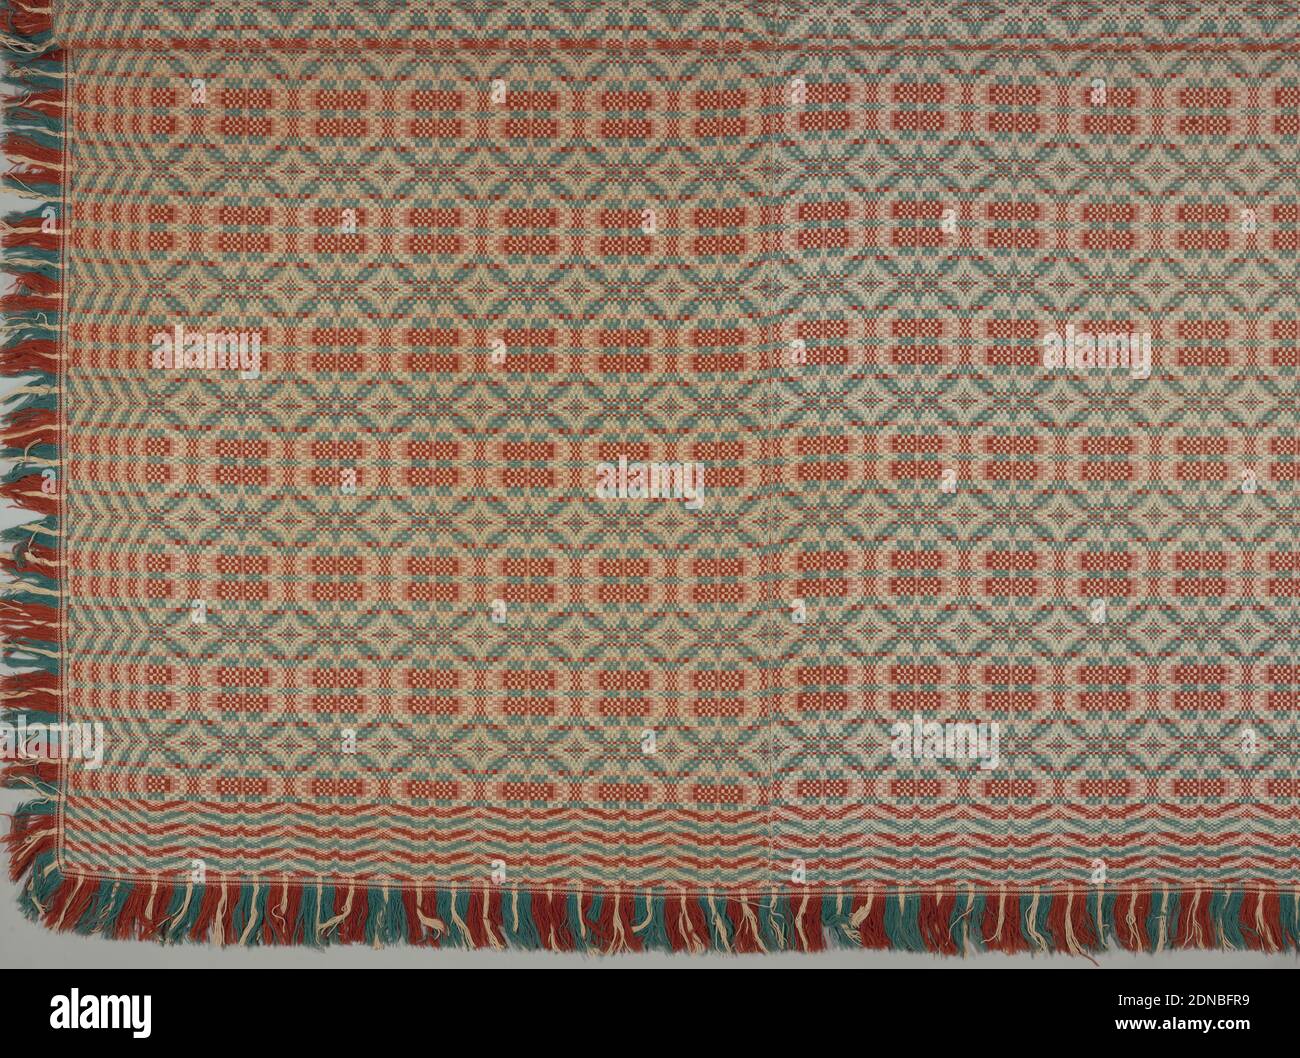 Coverlet, Medium: wool, cotton, Overshot coverlet in rust red, blue-green and tan, made of two lengths stitched together., USA, 1840, woven textiles, Coverlet Stock Photo